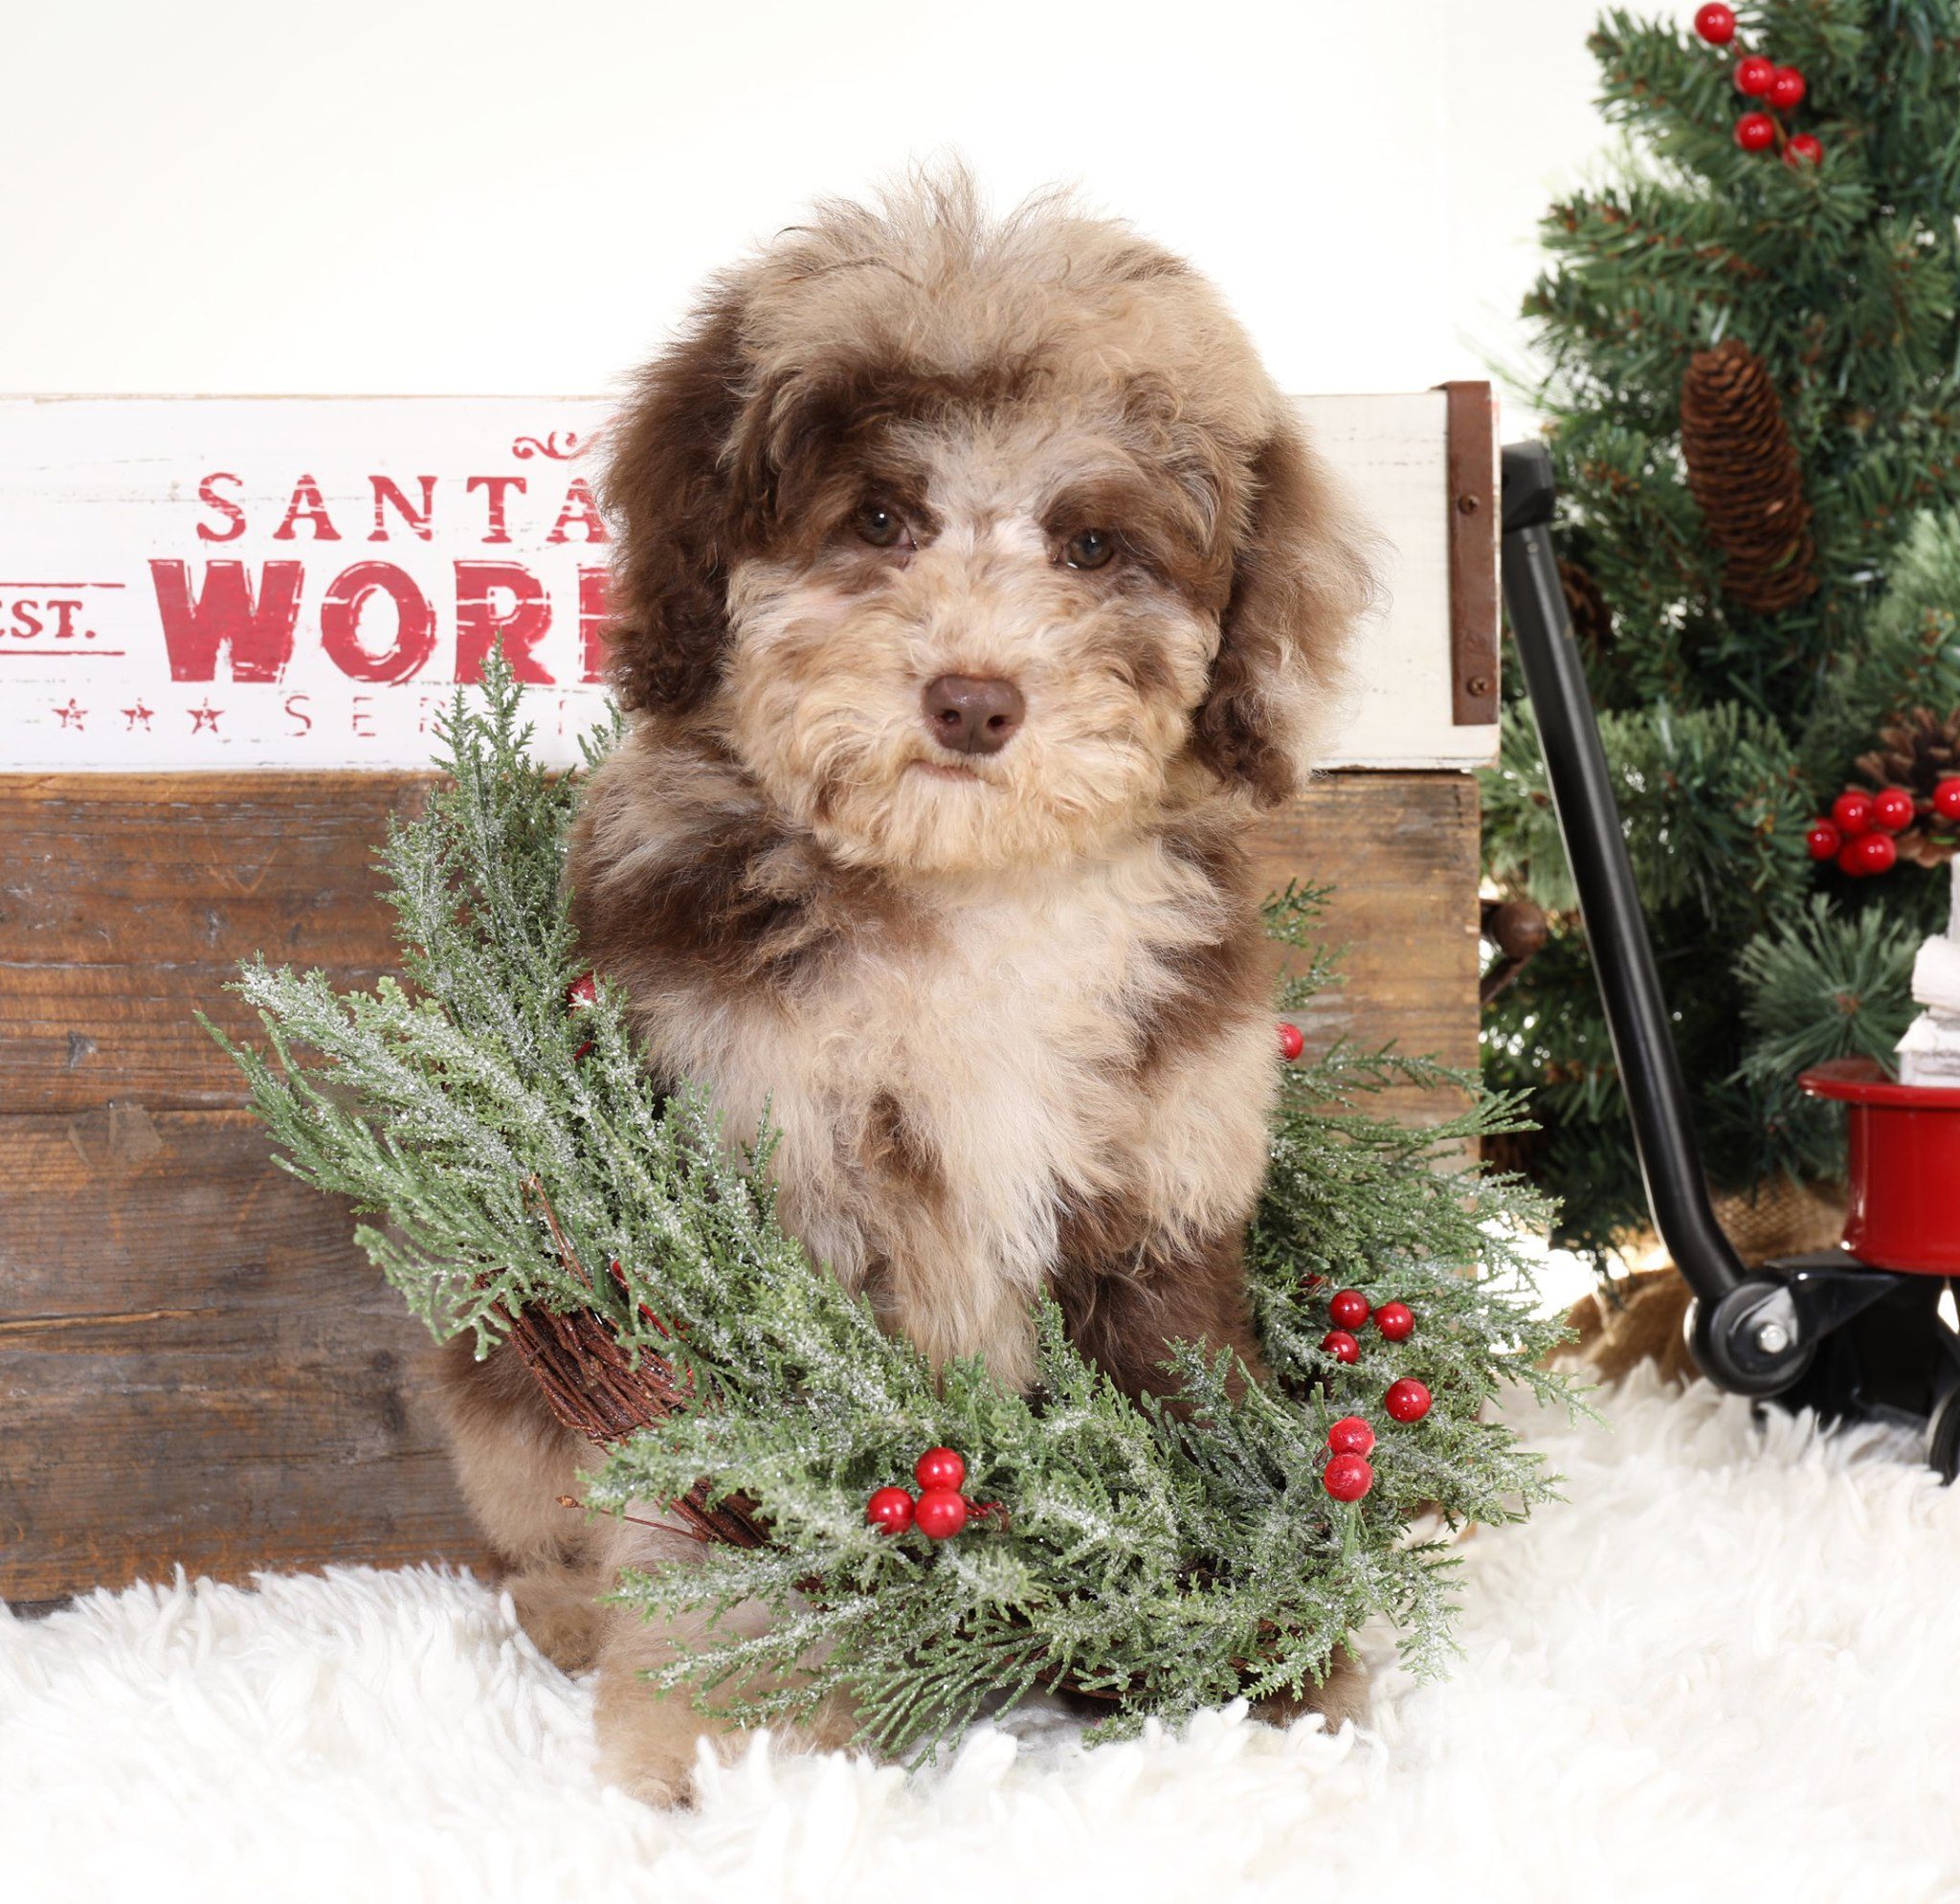 The wookie parti golden doodle is dressed up for all the Christmas festivities! His bright Christmas wreath is the perfect way to celebrate the season. His tail wags with excitement as he takes in all the sights and smells of Christmas. What a great dog with beautiful markings. Bred at Smeraglia Teddybear Goldendoodles